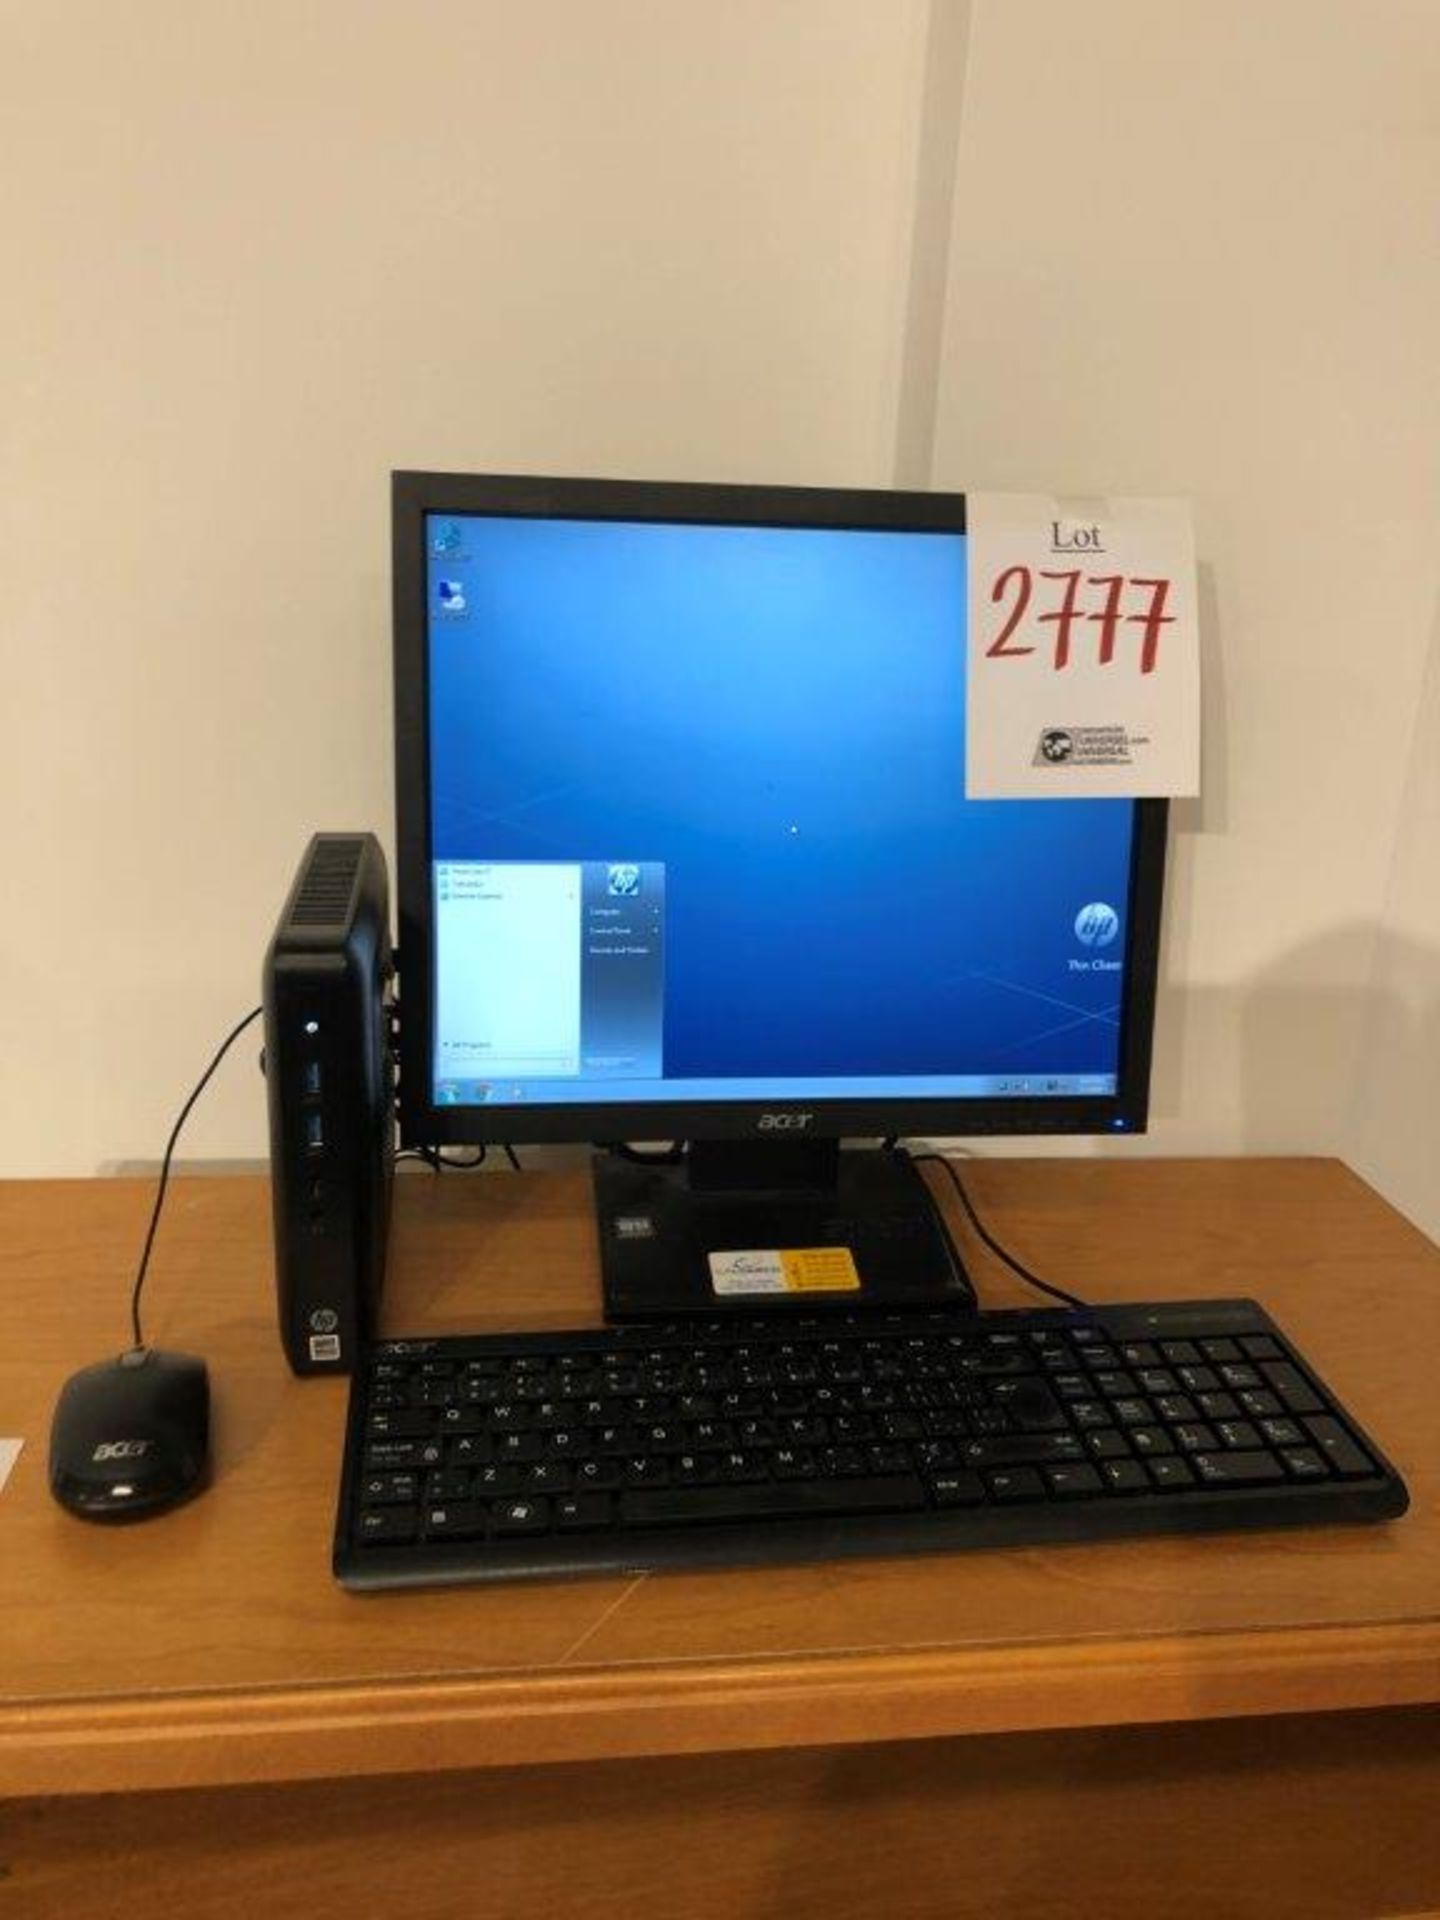 Dell t520 1.20 ghz 4gig with monitor, keyboard, mouse (lot)